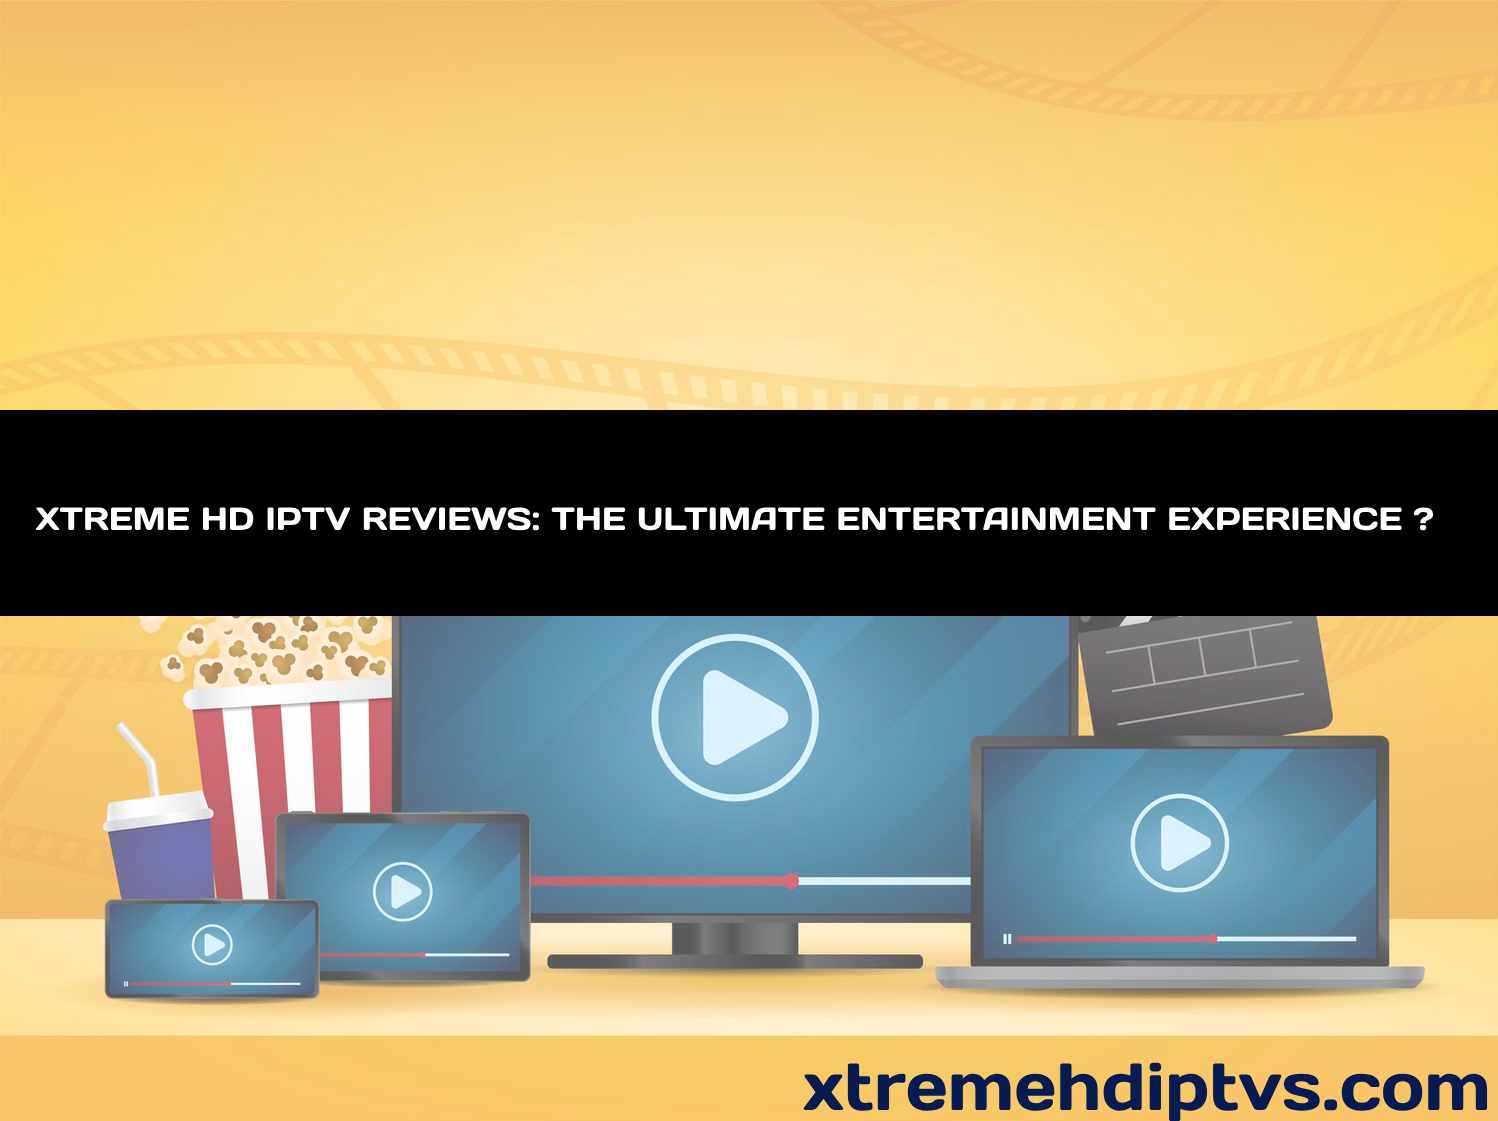 XTREME HD IPTV REVIEWS THE ULTIMATE ENTERTAINMENT EXPERIENCE